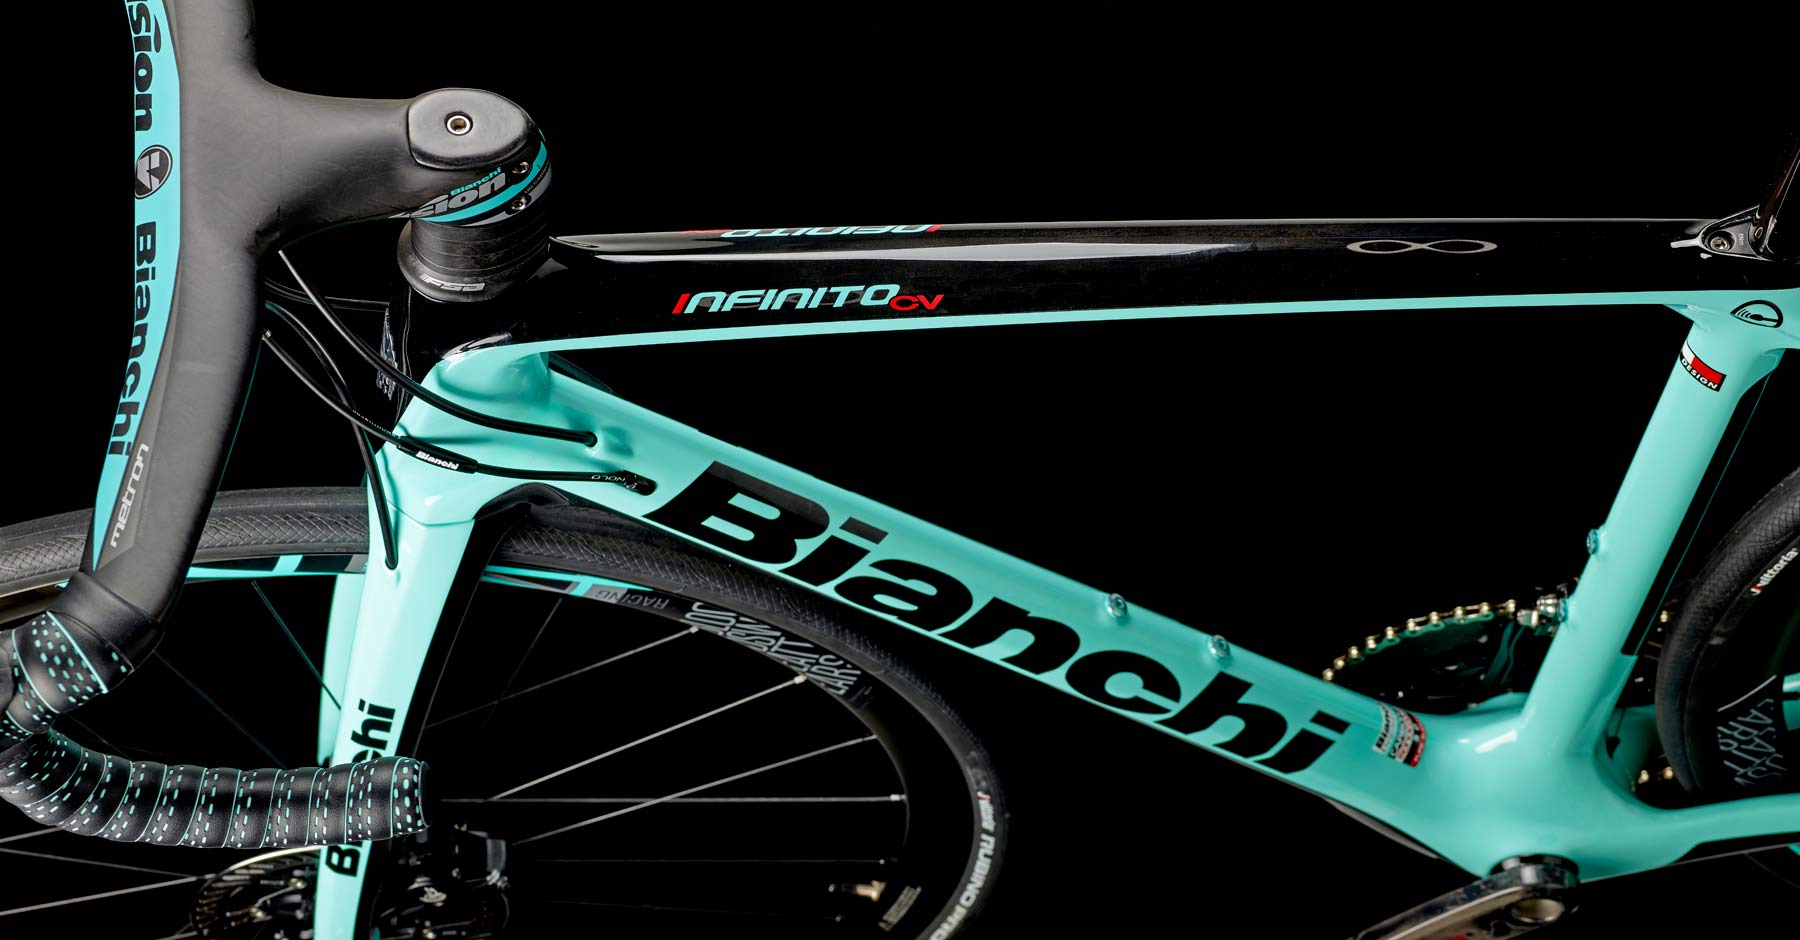 Bianchi lays Countervail up for road discs with new Oltre XR4 Disc & Infinito CV Disc Bikerumor